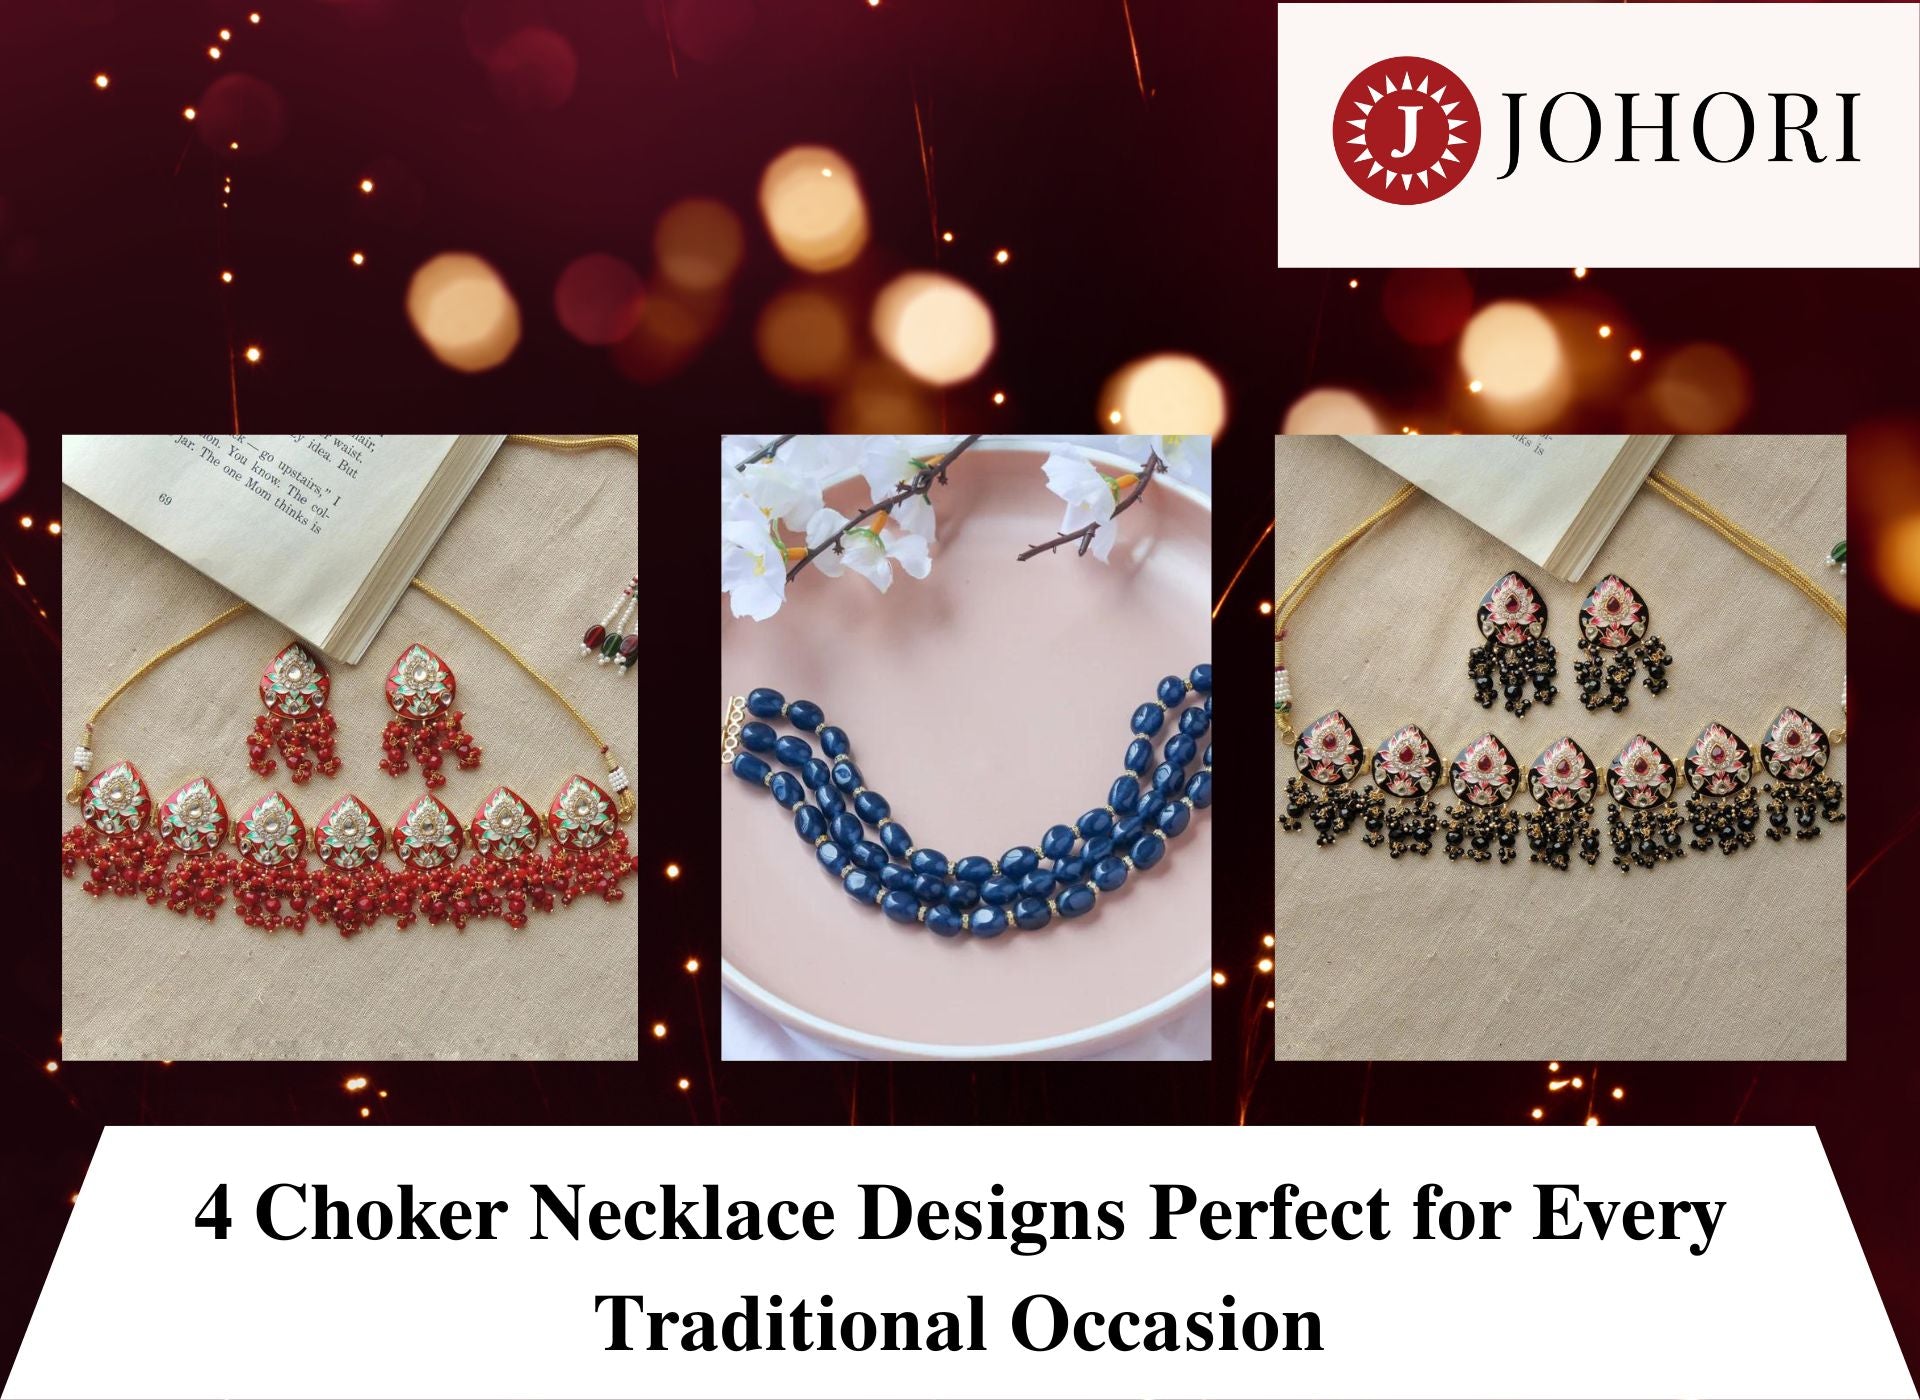 4 Choker Necklace Designs Perfect for Every Traditional Occasion